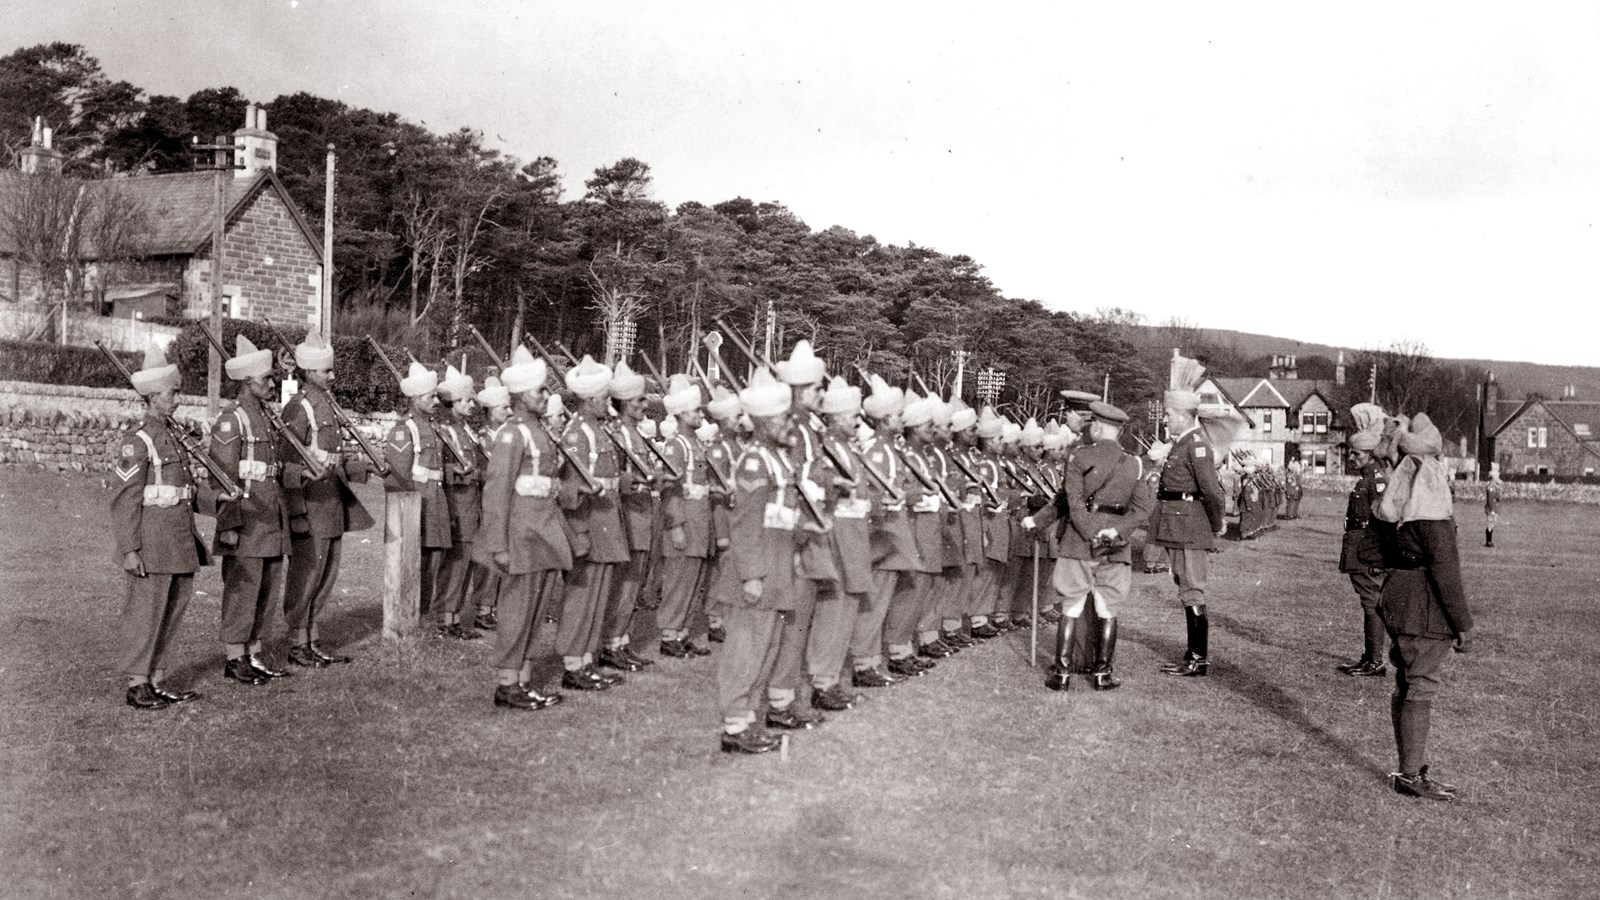 Photograph showing Force K6 soldiers in King George V Park, Golspie, Nov 1942 © Photograph used with the permission of Golspie Heritage Society.